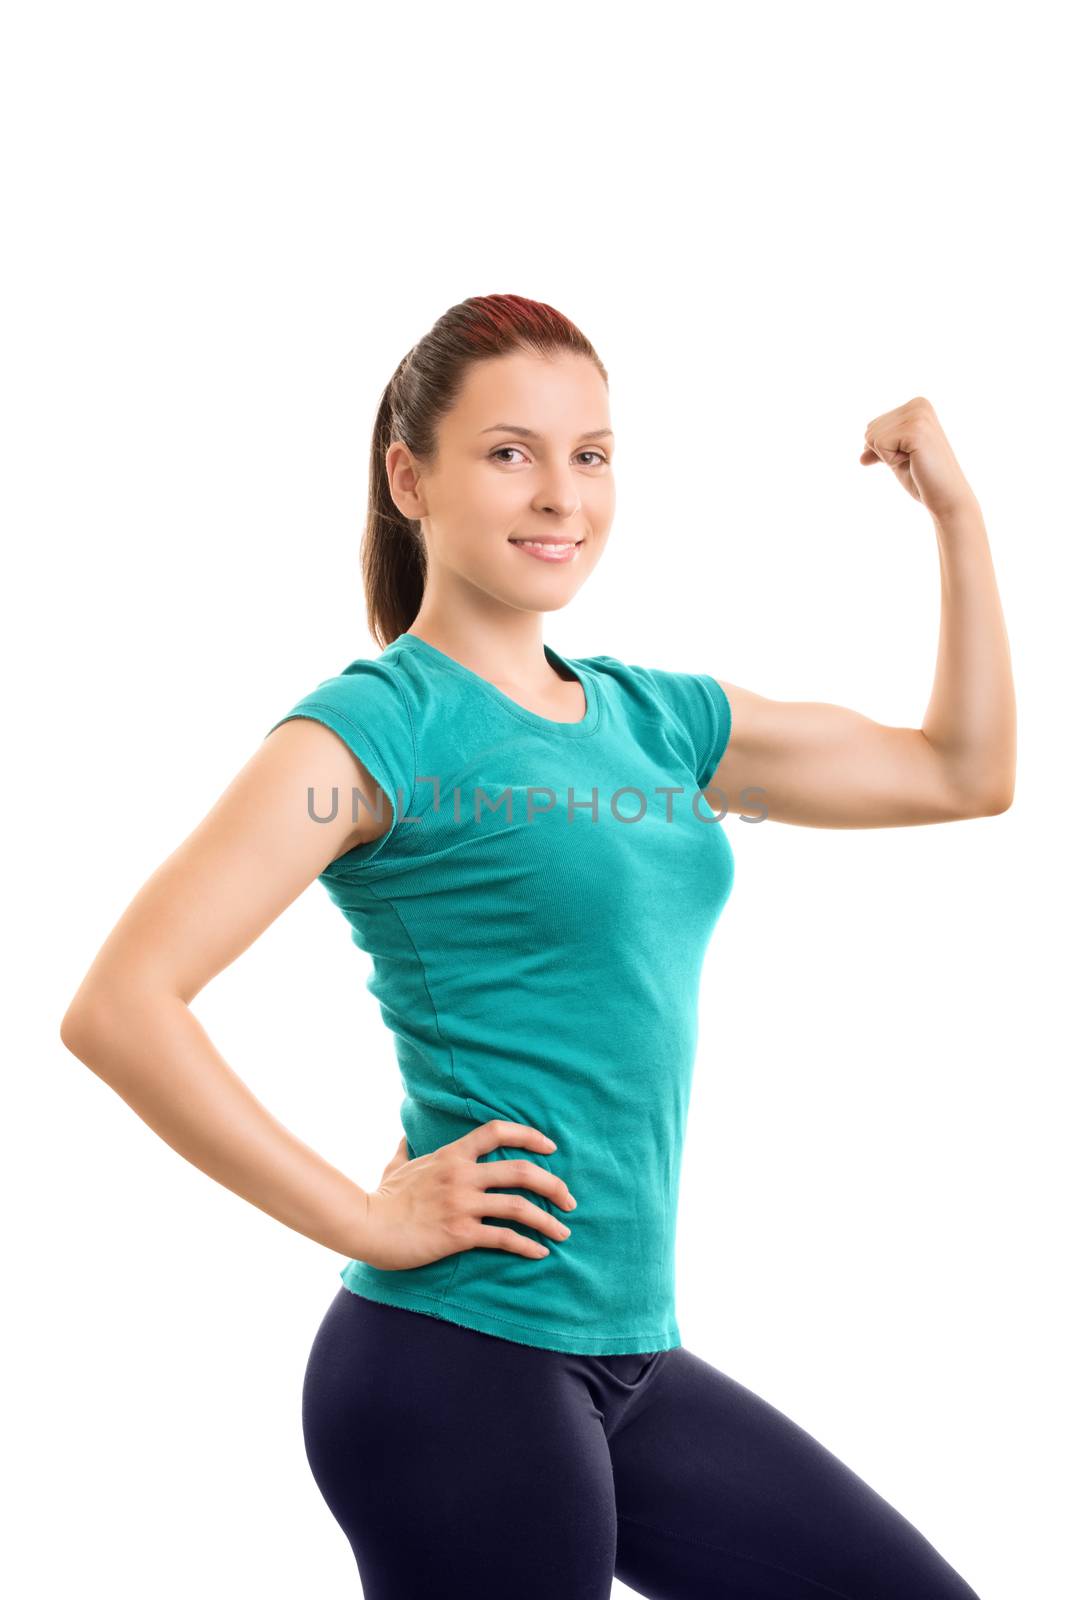 Staying fit. You need to work for it. Beautiful young girl flexing her arm and giving encouragement to go to the gym, isolated on white background.